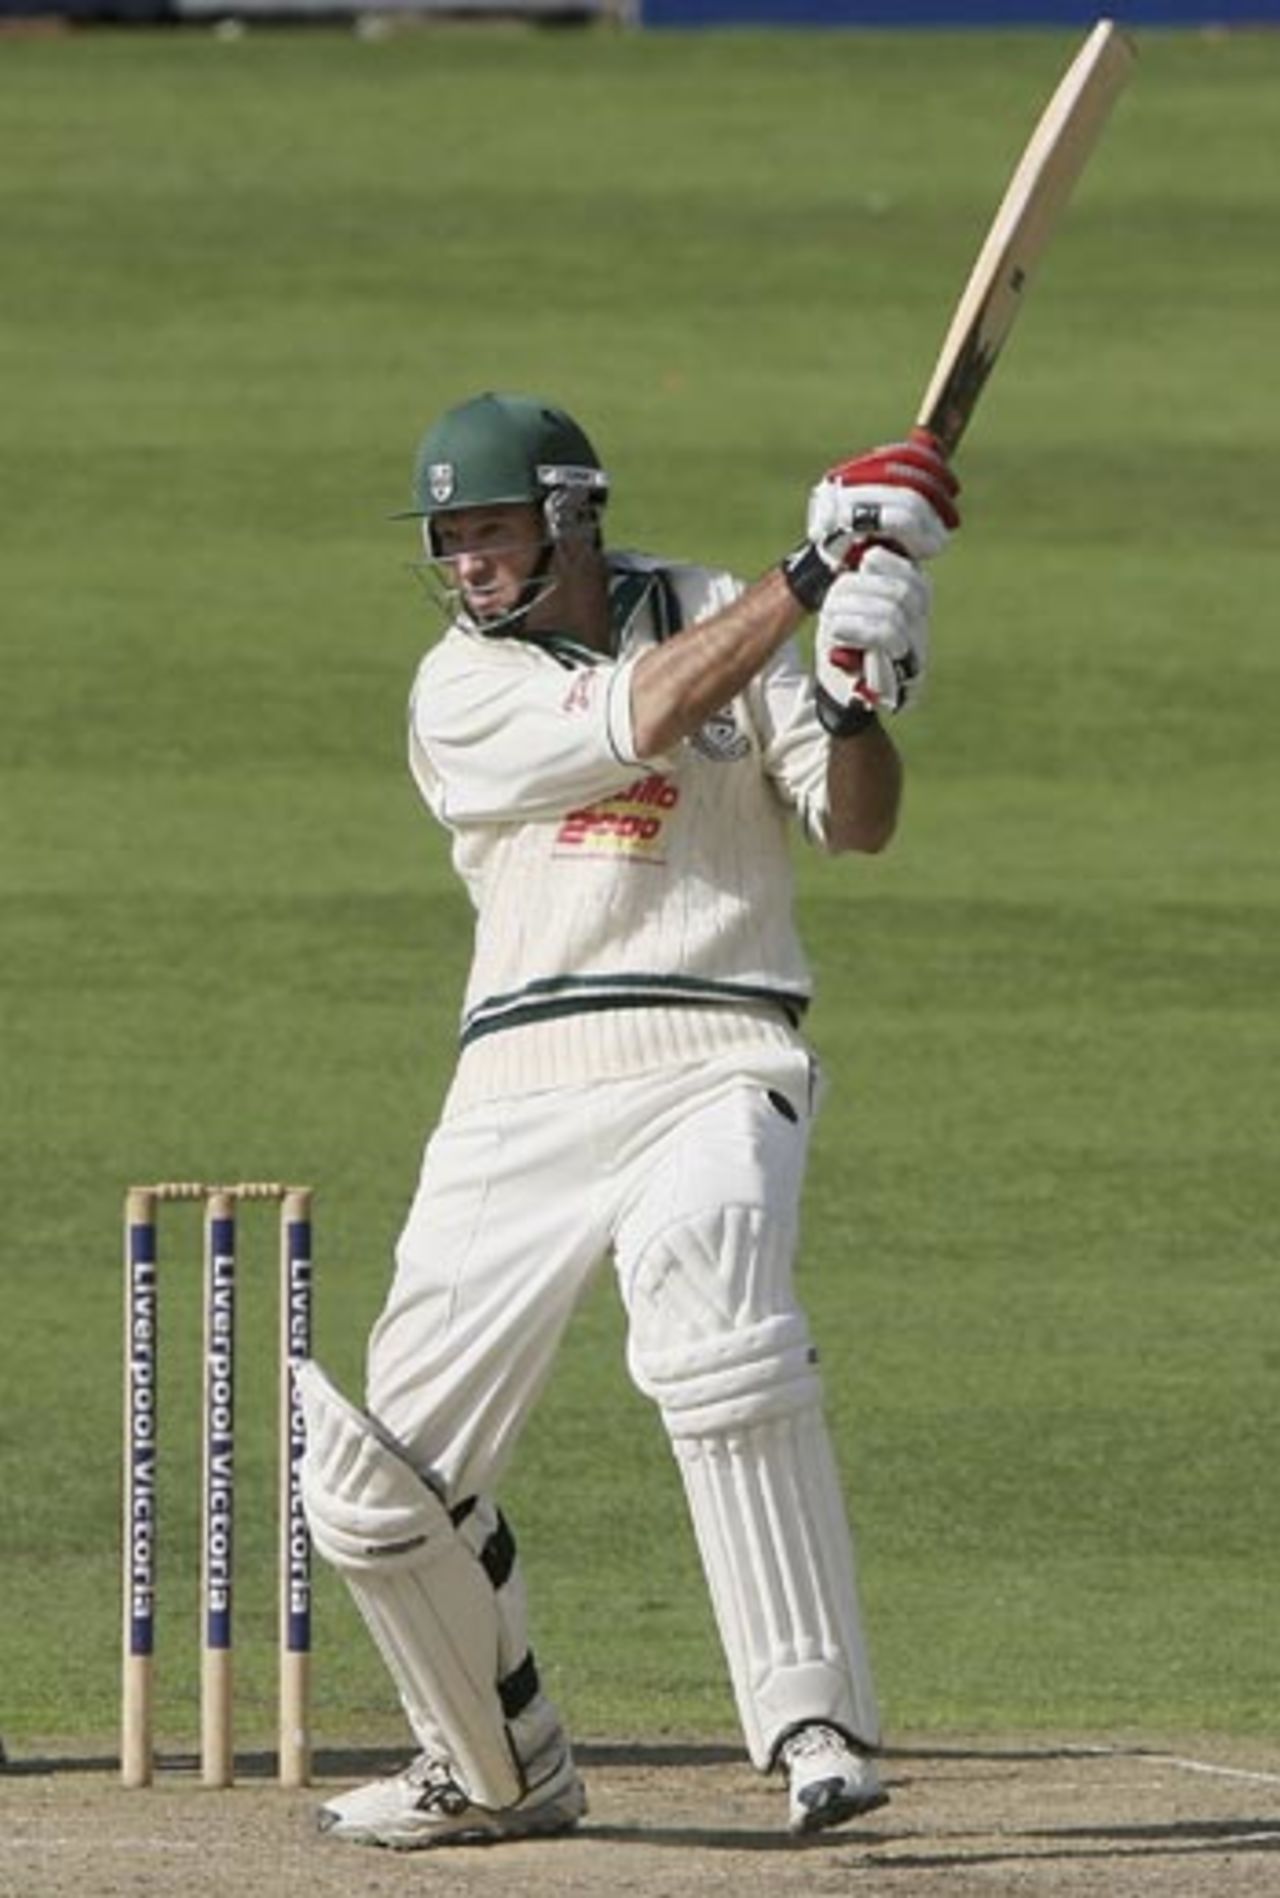 Autumn glory: Graeme Hick powers towards another hundred, Worcestershire v Essex,  Worcester, September 2, 2006